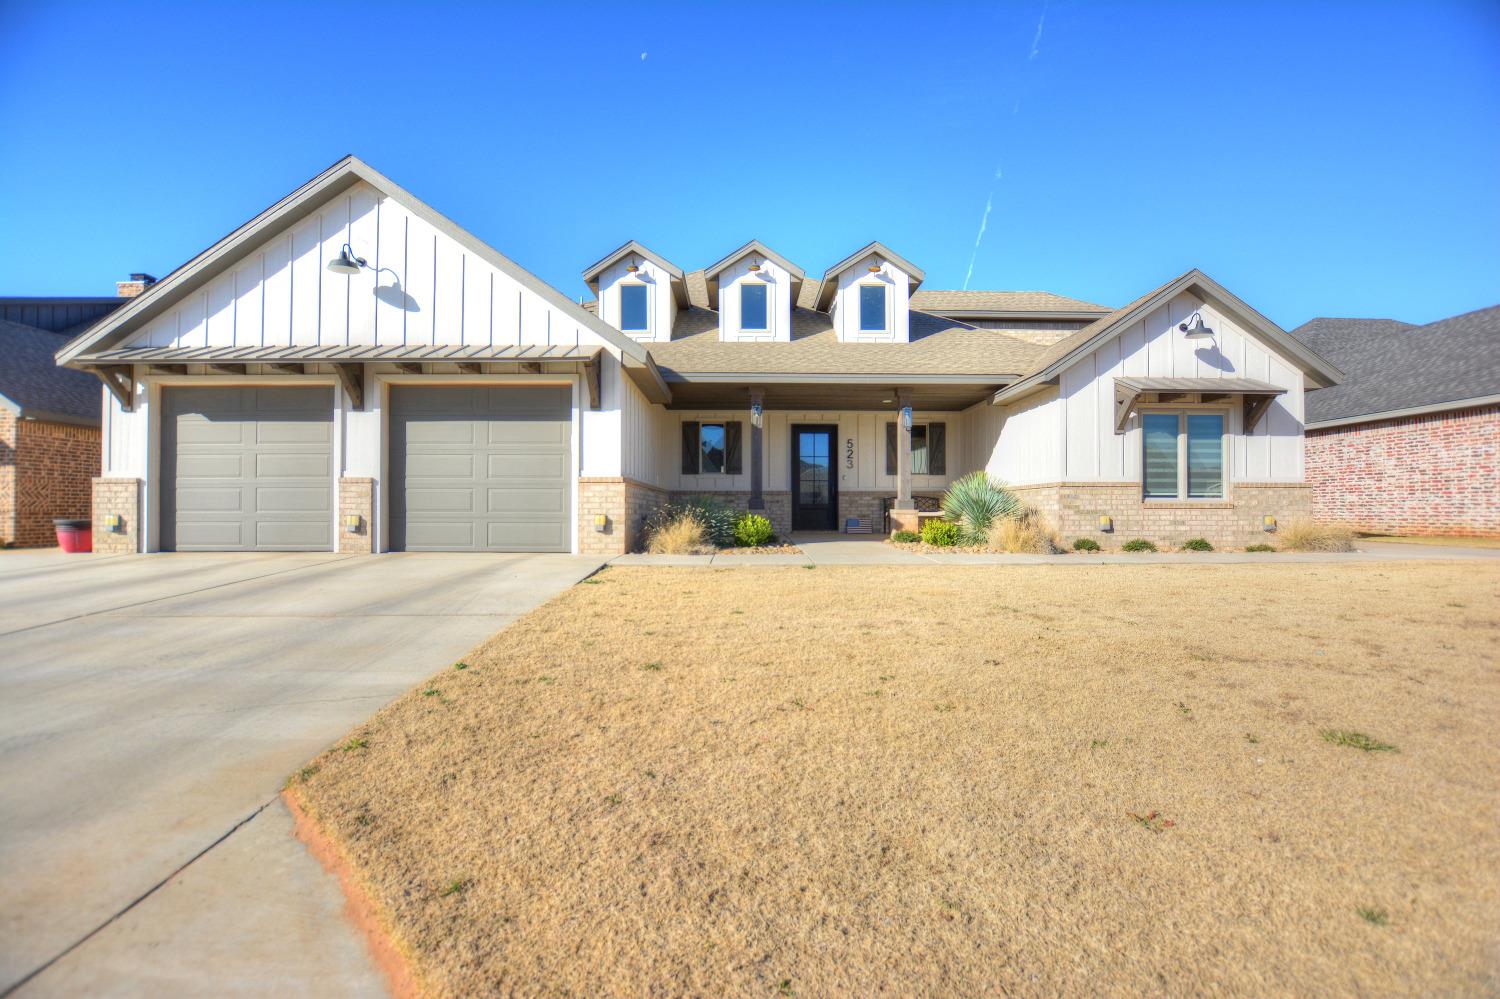 Custom Built Home in Shallowater! This 2019 2 story home has room for everyone with 4 bedrooms, 2 living areas and an office! The kitchen is open concept with a large island, farm house sink, and stainless steel appliances. Oversized pantry has counter-space, room for a fridge and lots of storage! Downstairs living area has a gorgeous fireplace with built-ins. Upstairs has a second living area and fourth bedroom. Spacious backyard has a pool, a second half bath and a covered patio perfect for entertaining. Located in the wonderful Shallowater school district!